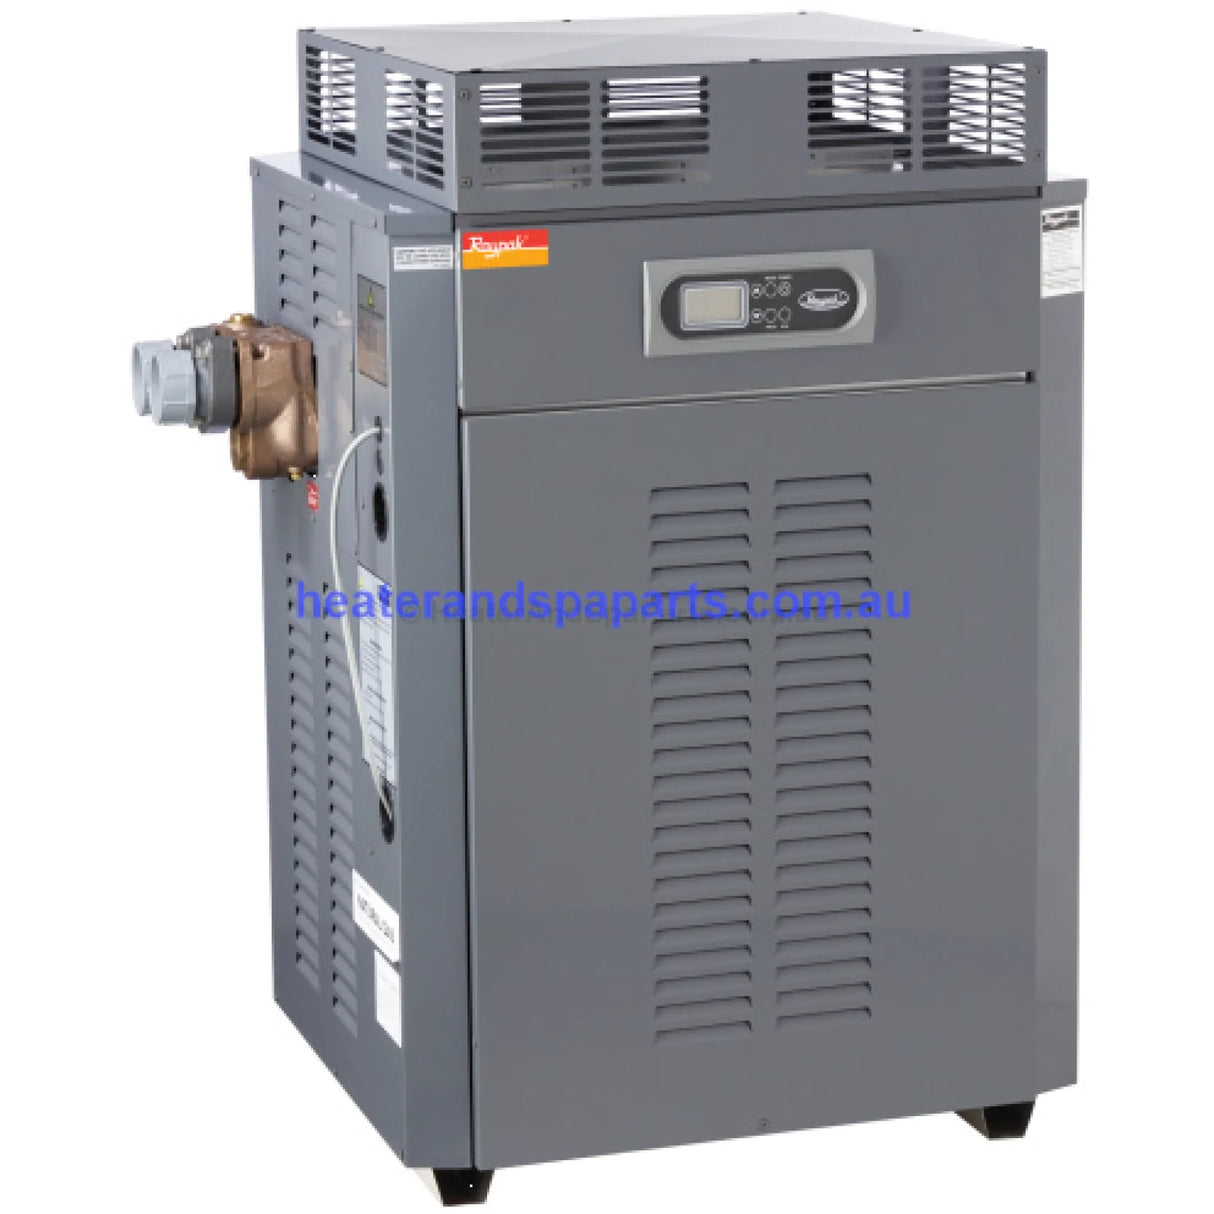 Raypak 200, 280, 350, 430 Gas Pool Heater Spare Parts with Diagrams - also RP2100 - Heater and Spa Parts